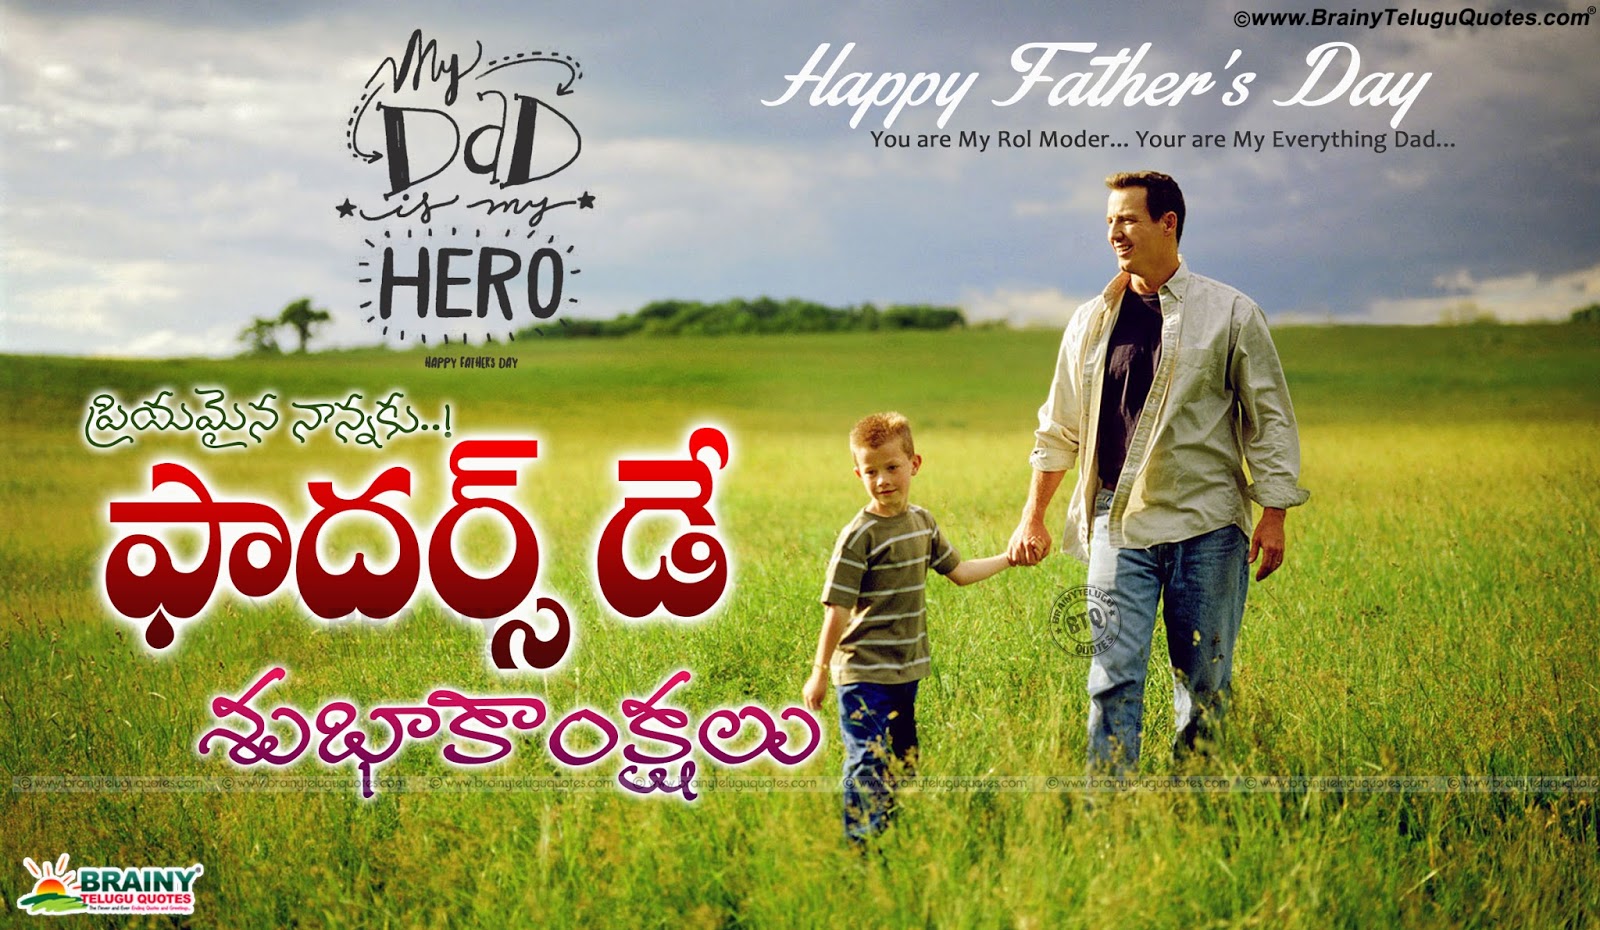 Father And Son Hd Wallpapers, Happy Fathers Day Quotes - Fathers Day Quotes  From Son In Hindi - 1600x930 Wallpaper 